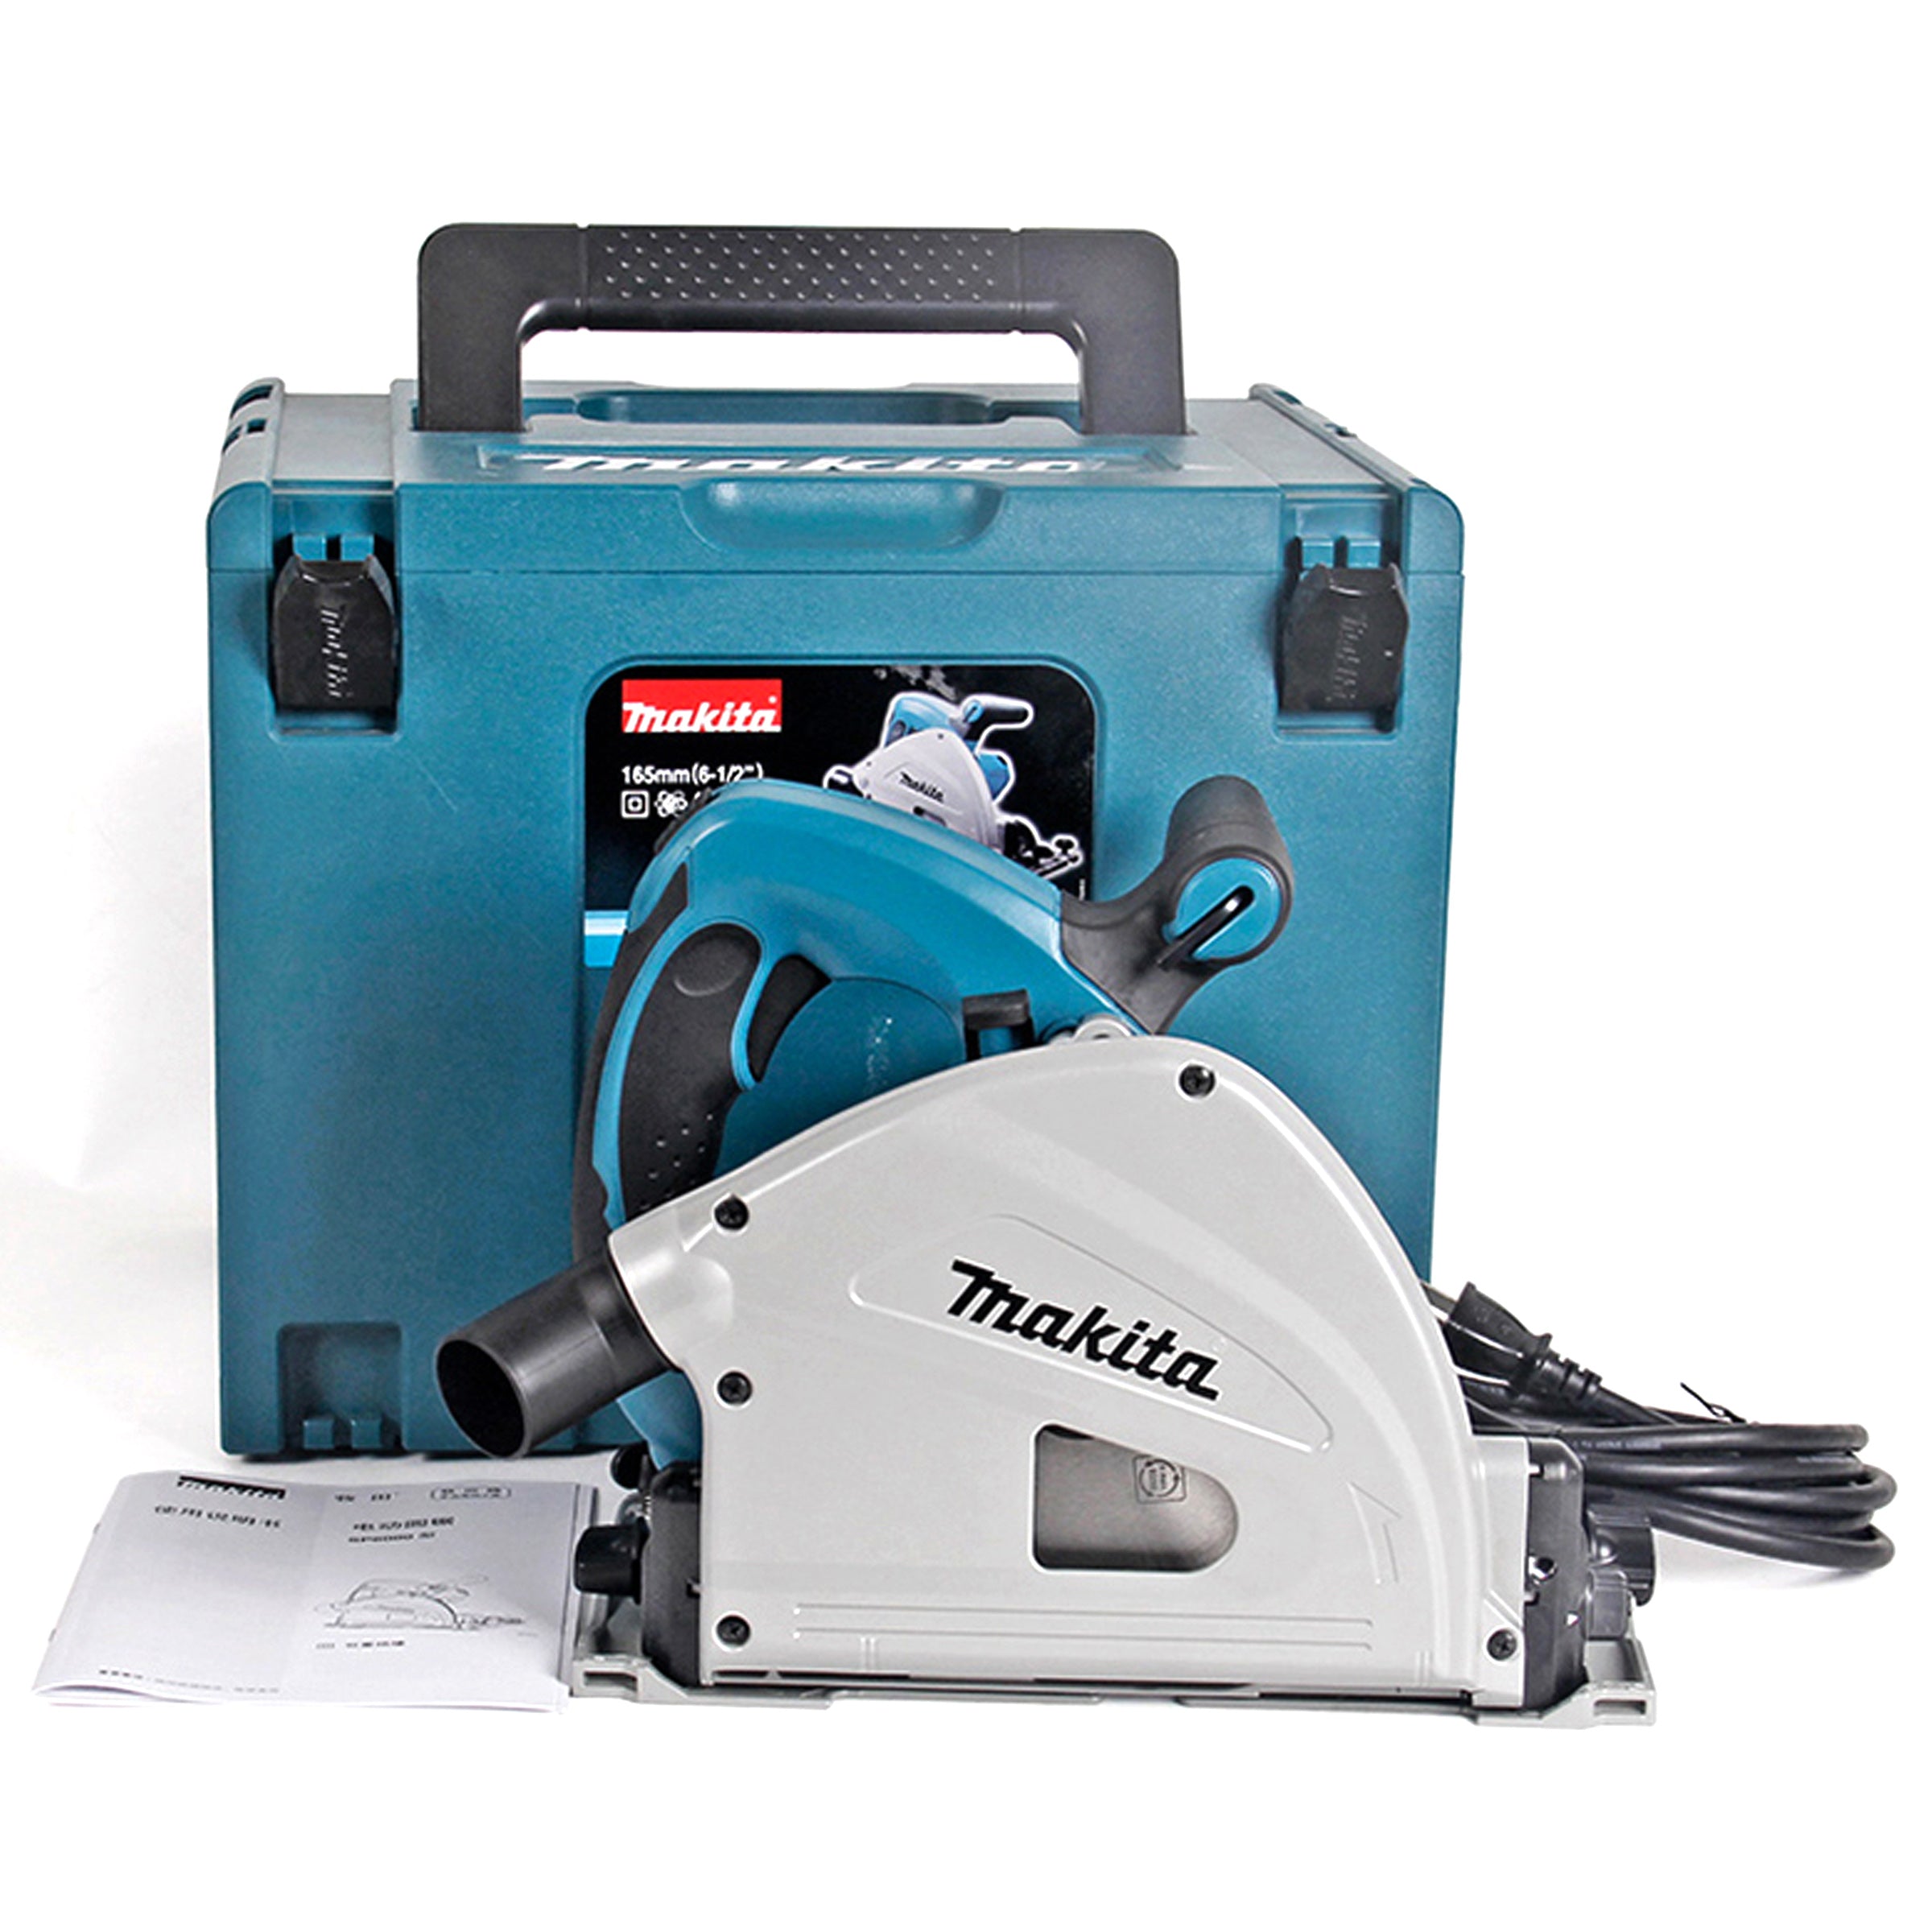 Makita Plunge Saw SP6000J(K) + 1400 Rail + Clamps Power Tool Services